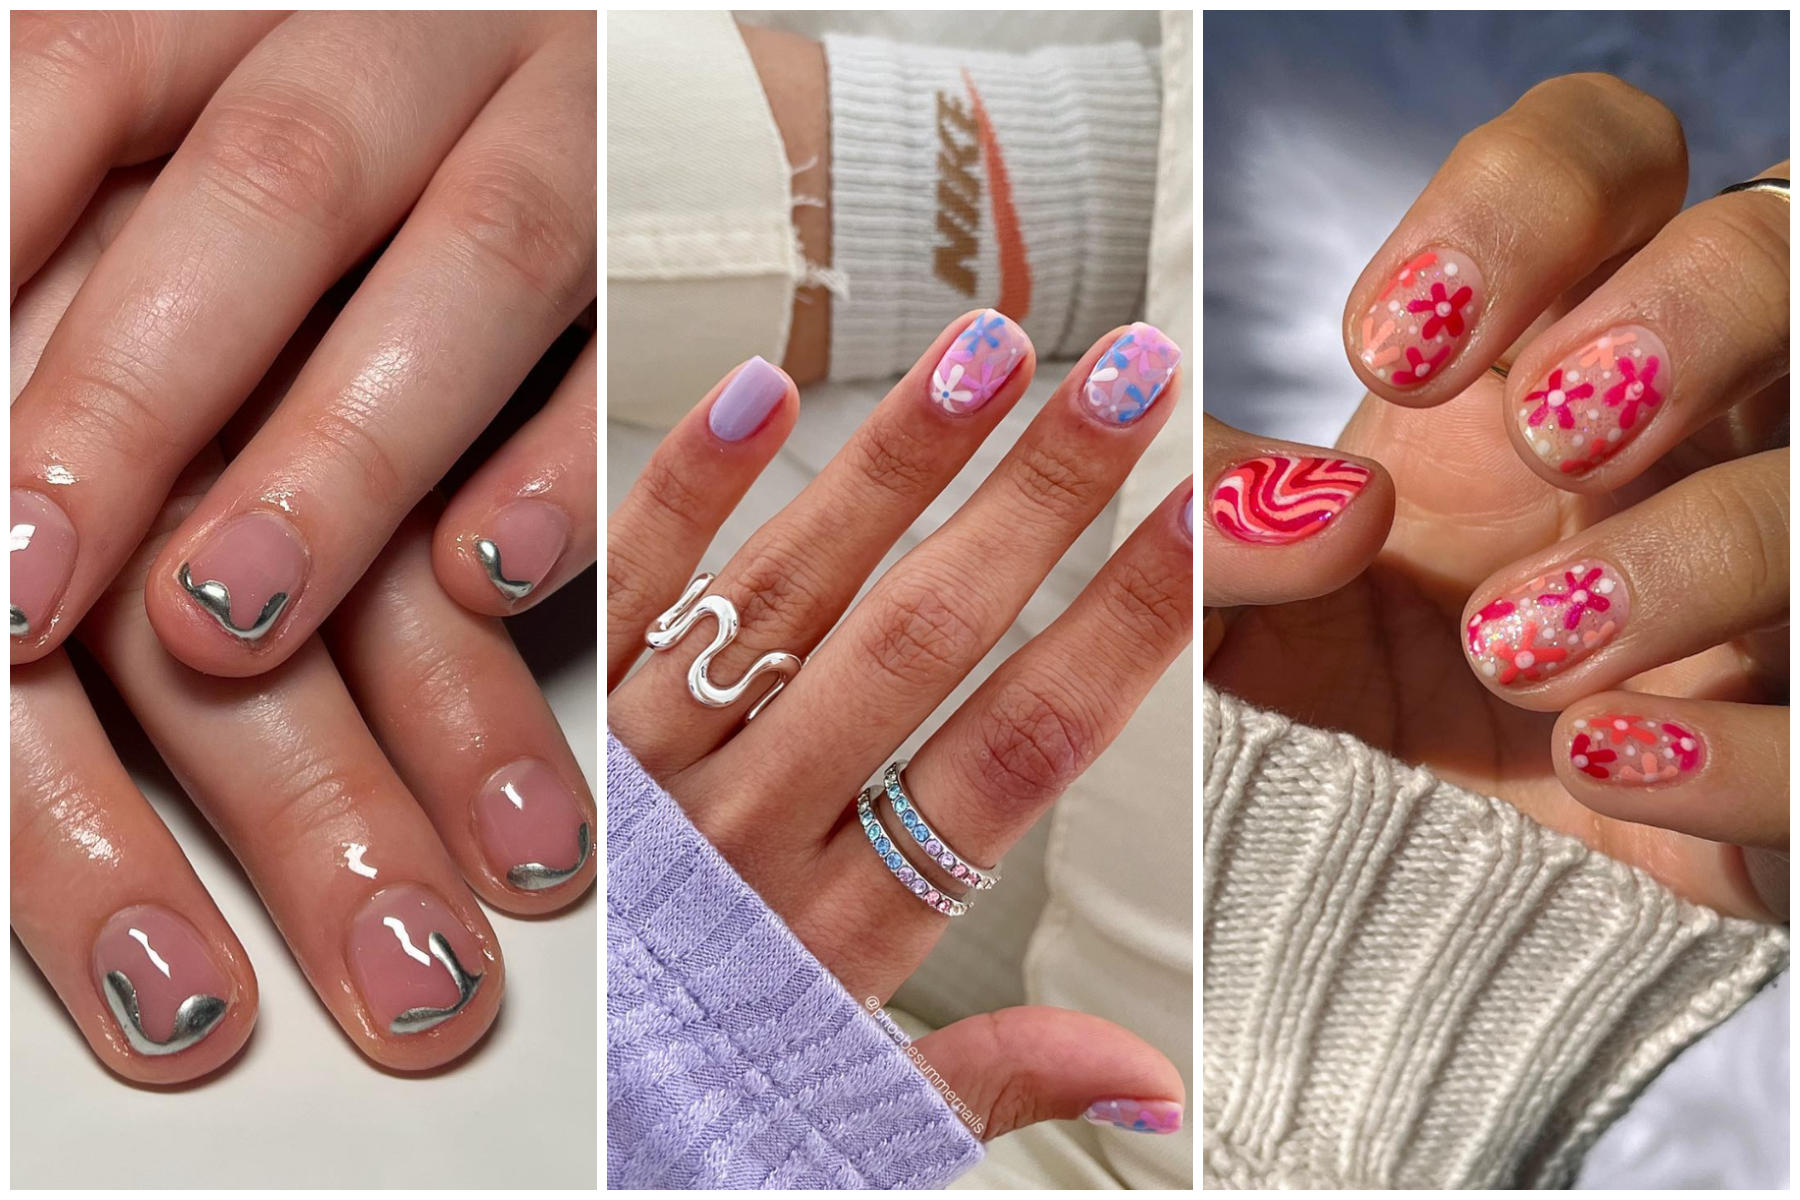 25 Trendy And Chic Designs For Short Nails - Styleoholic